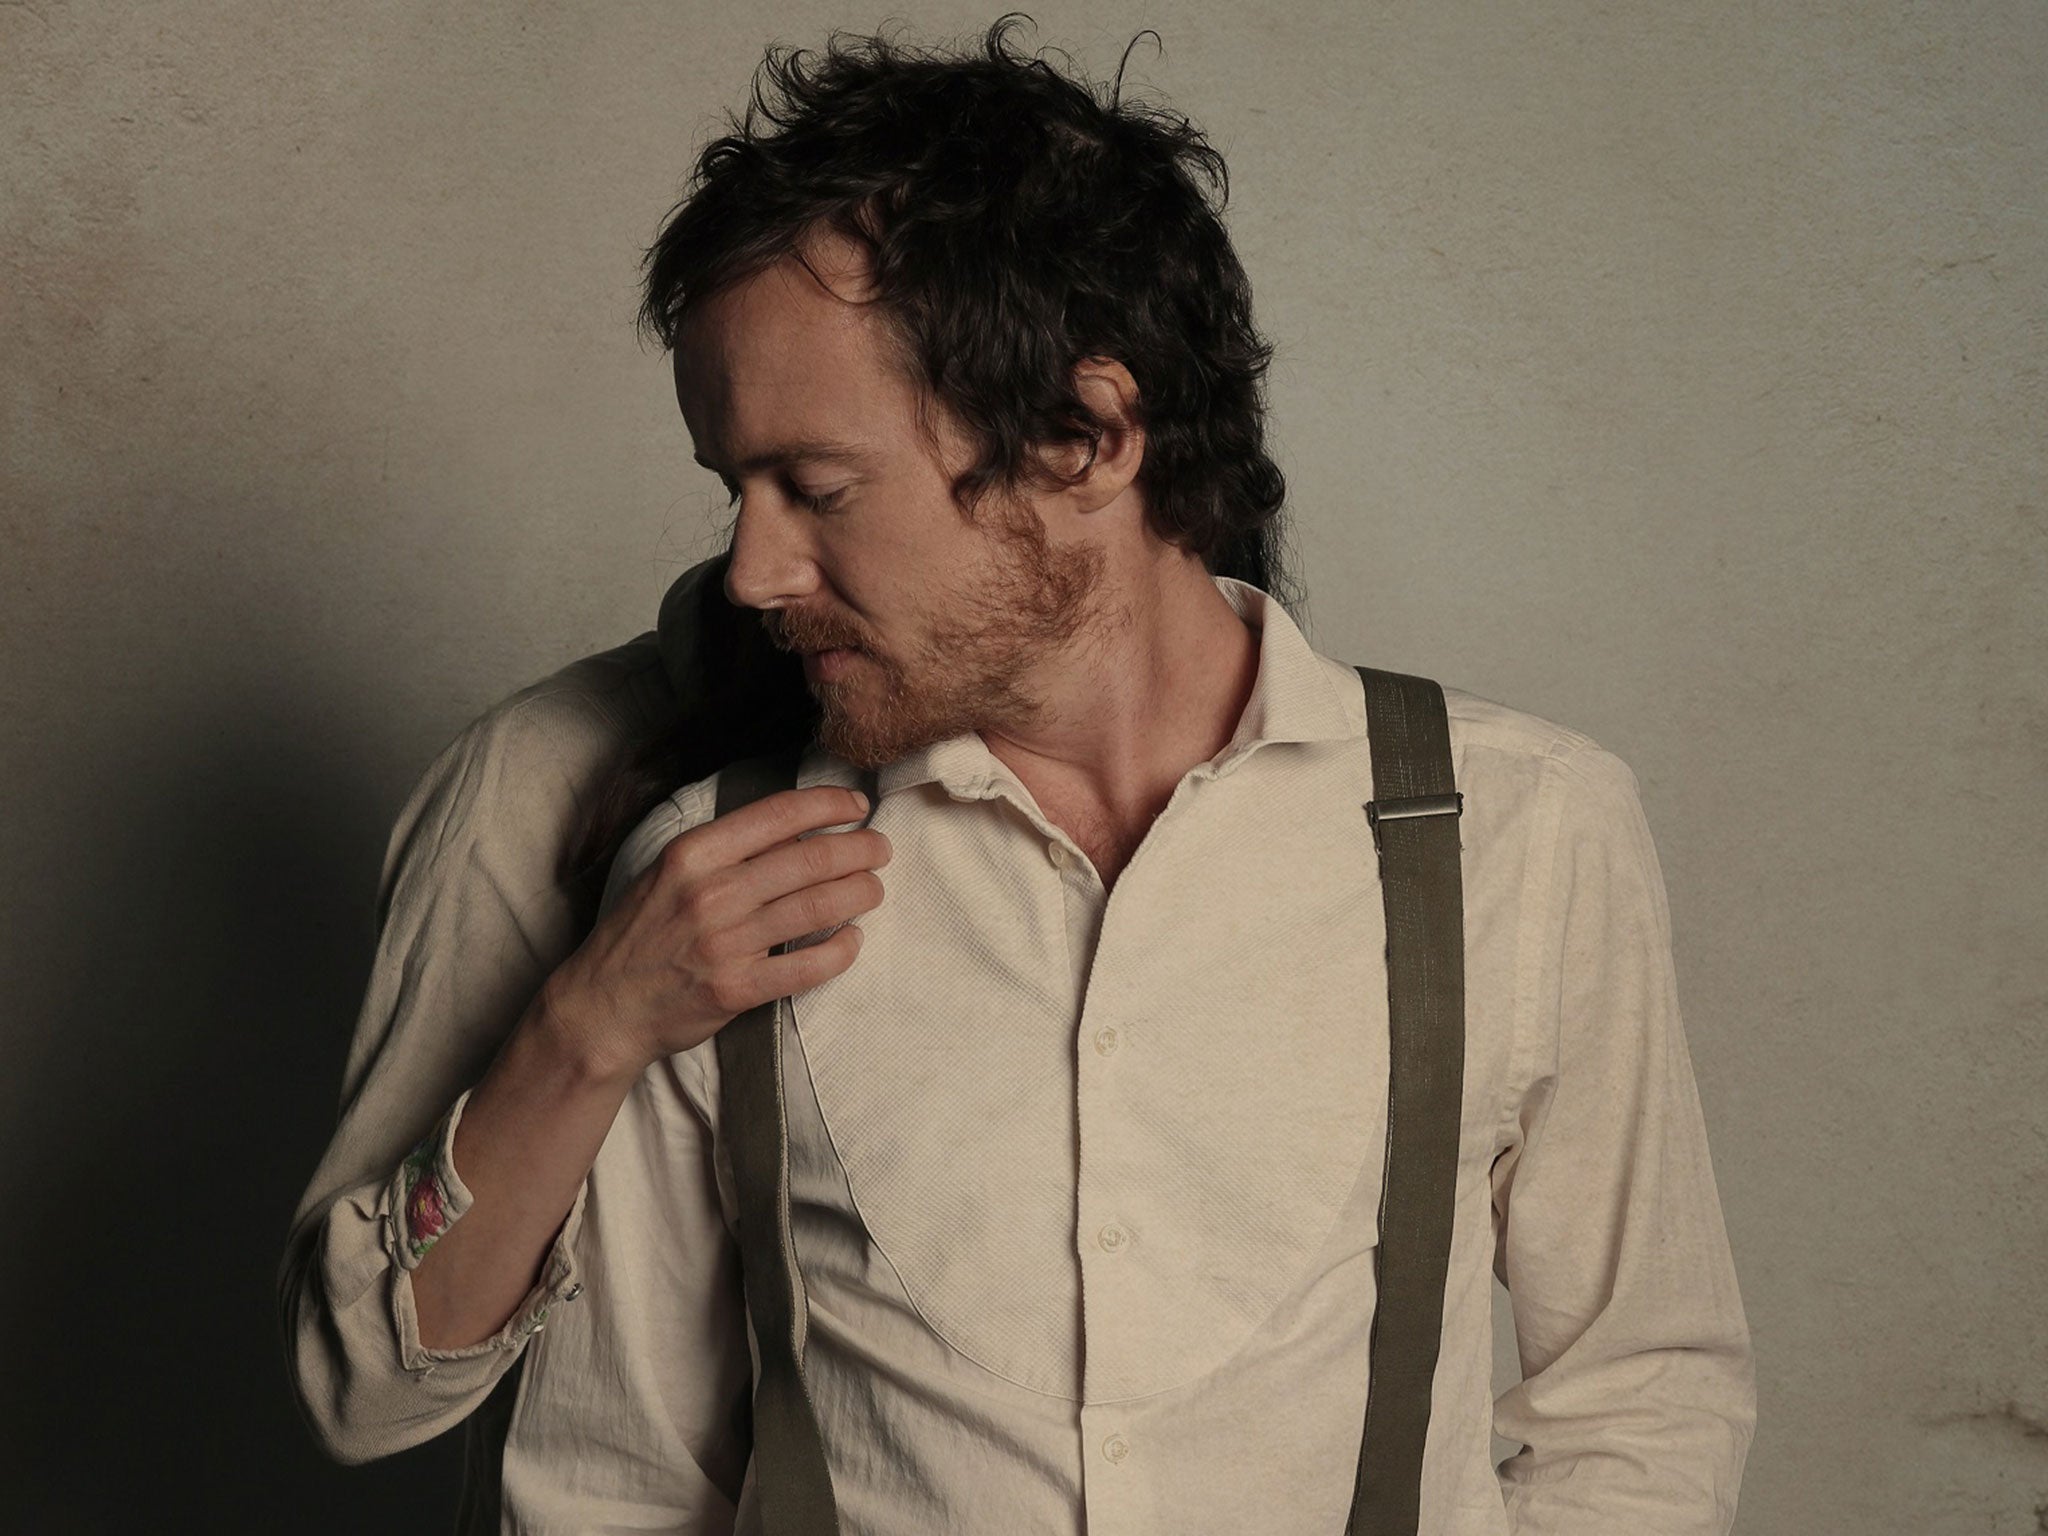 Damien Rice has returned to the music scene after an eight-year absence